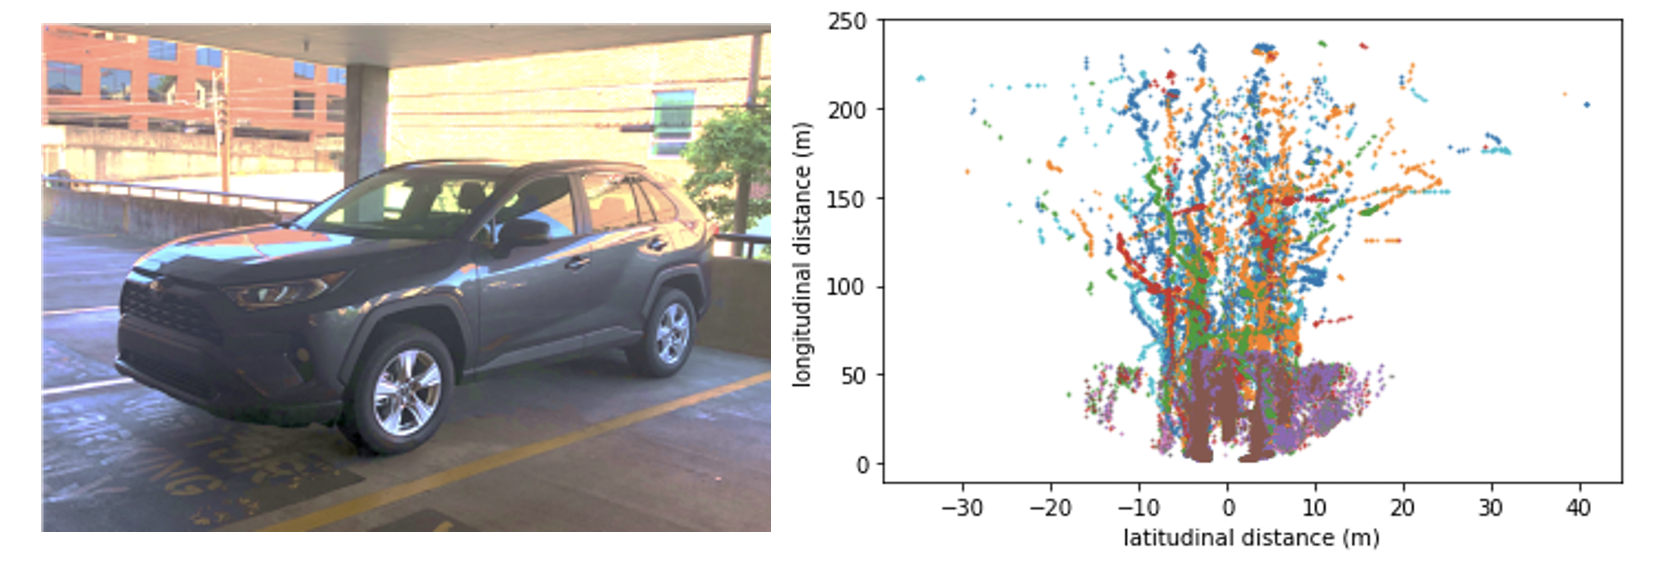 Estimating adaptive cruise control model parameters from on-board radar units